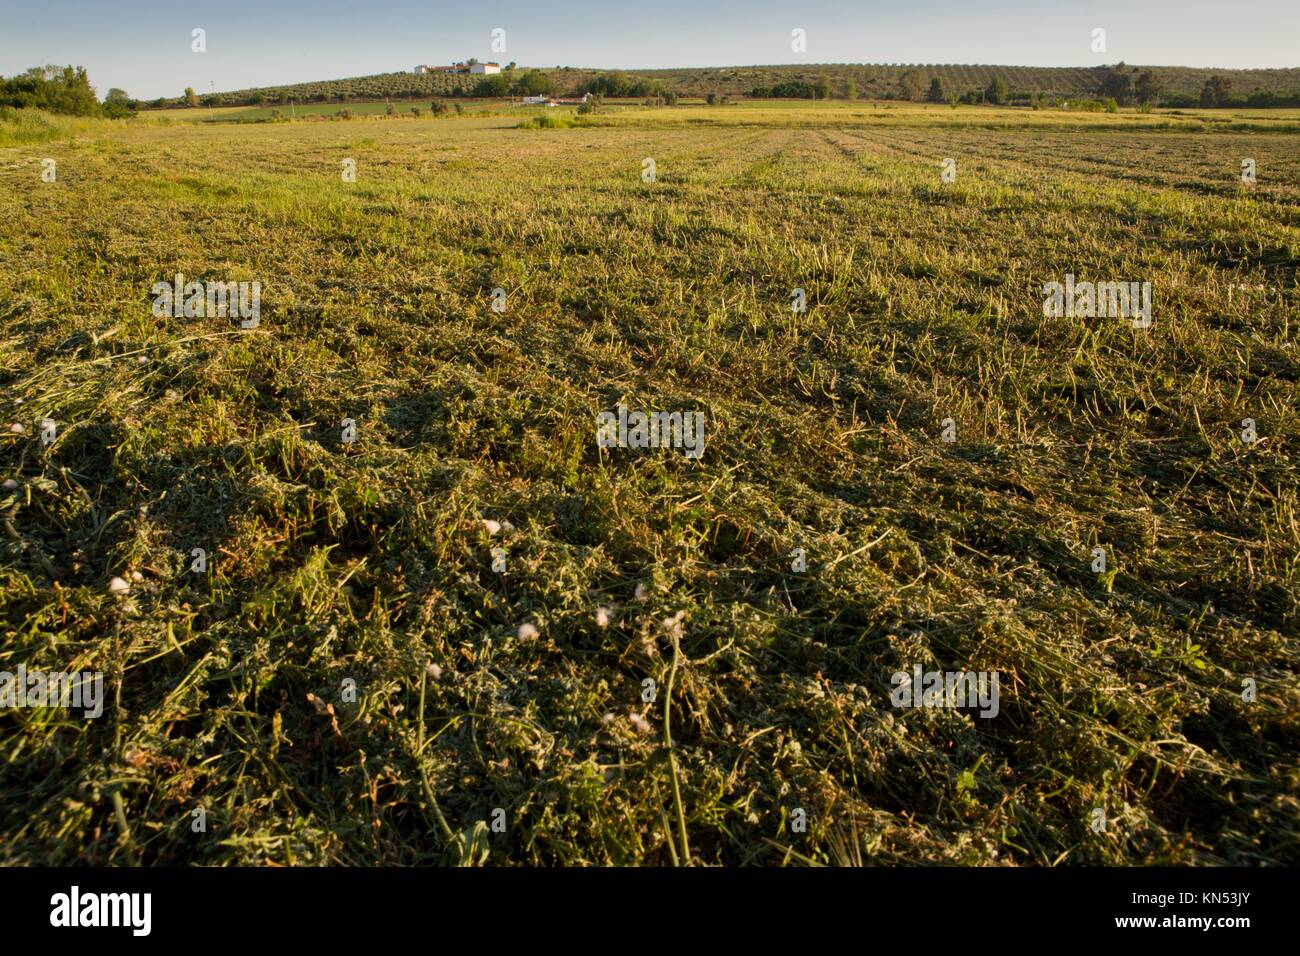 A view of an alfalfa field just cut, Extremadura, Spain. Stock Photo